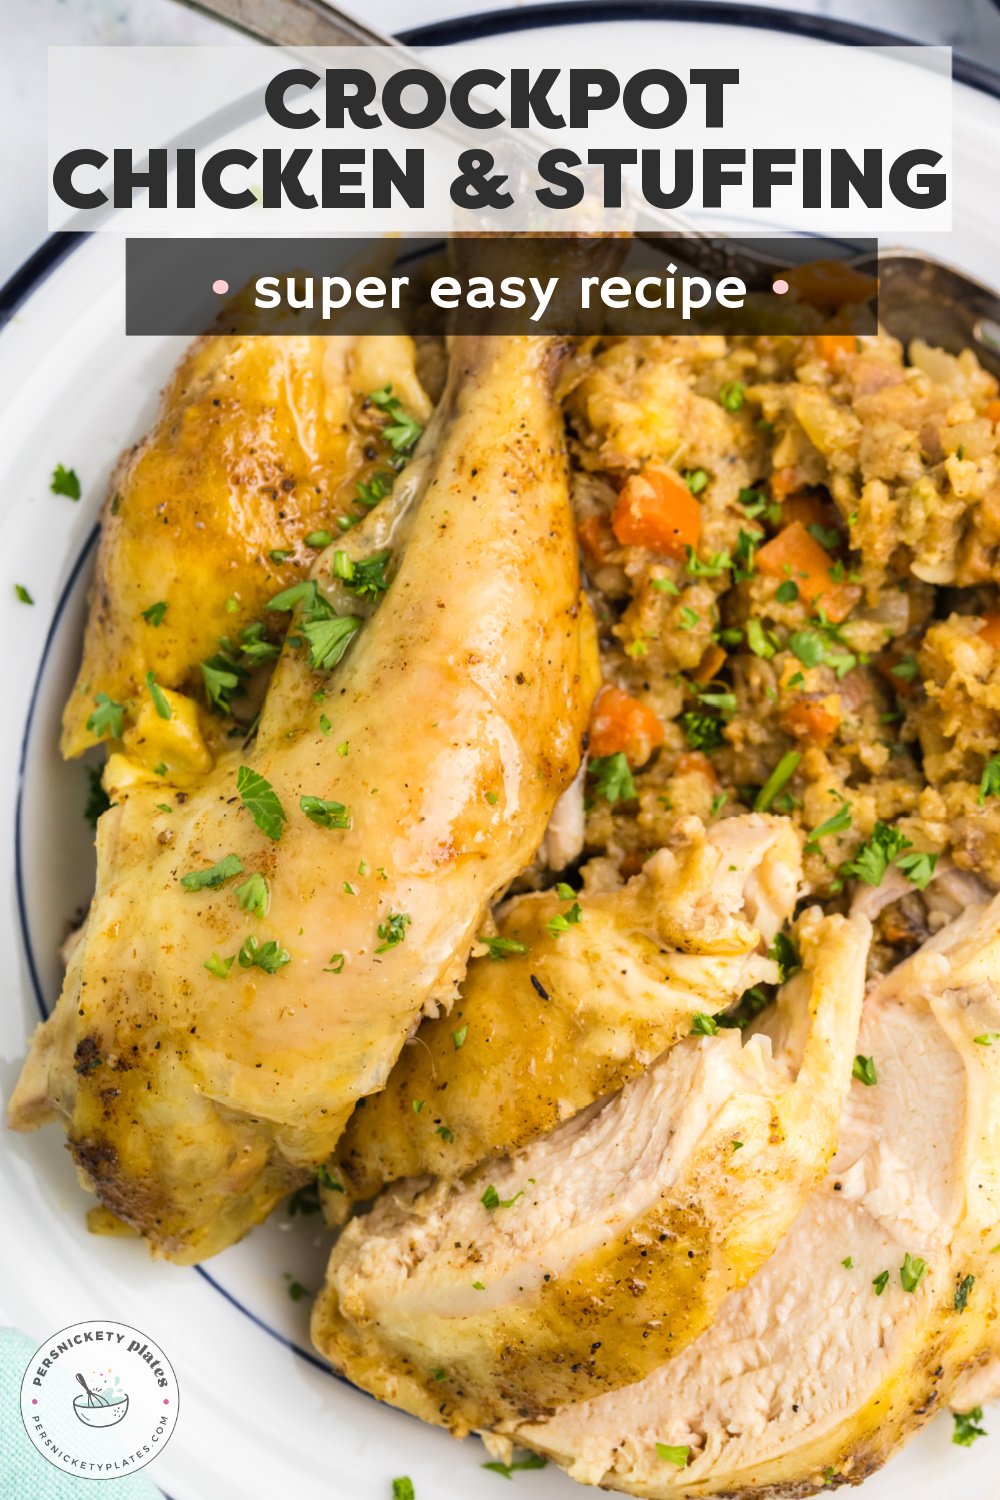 Cook an entire chicken, plus veggies, and stuffing in one pot, basically hands-free! You can't get easier than this slow cooker whole chicken and stuffing when it comes to feeding your family a healthy, wholesome meal with loads of flavor and minimal effort. | www.persnicketyplates.com